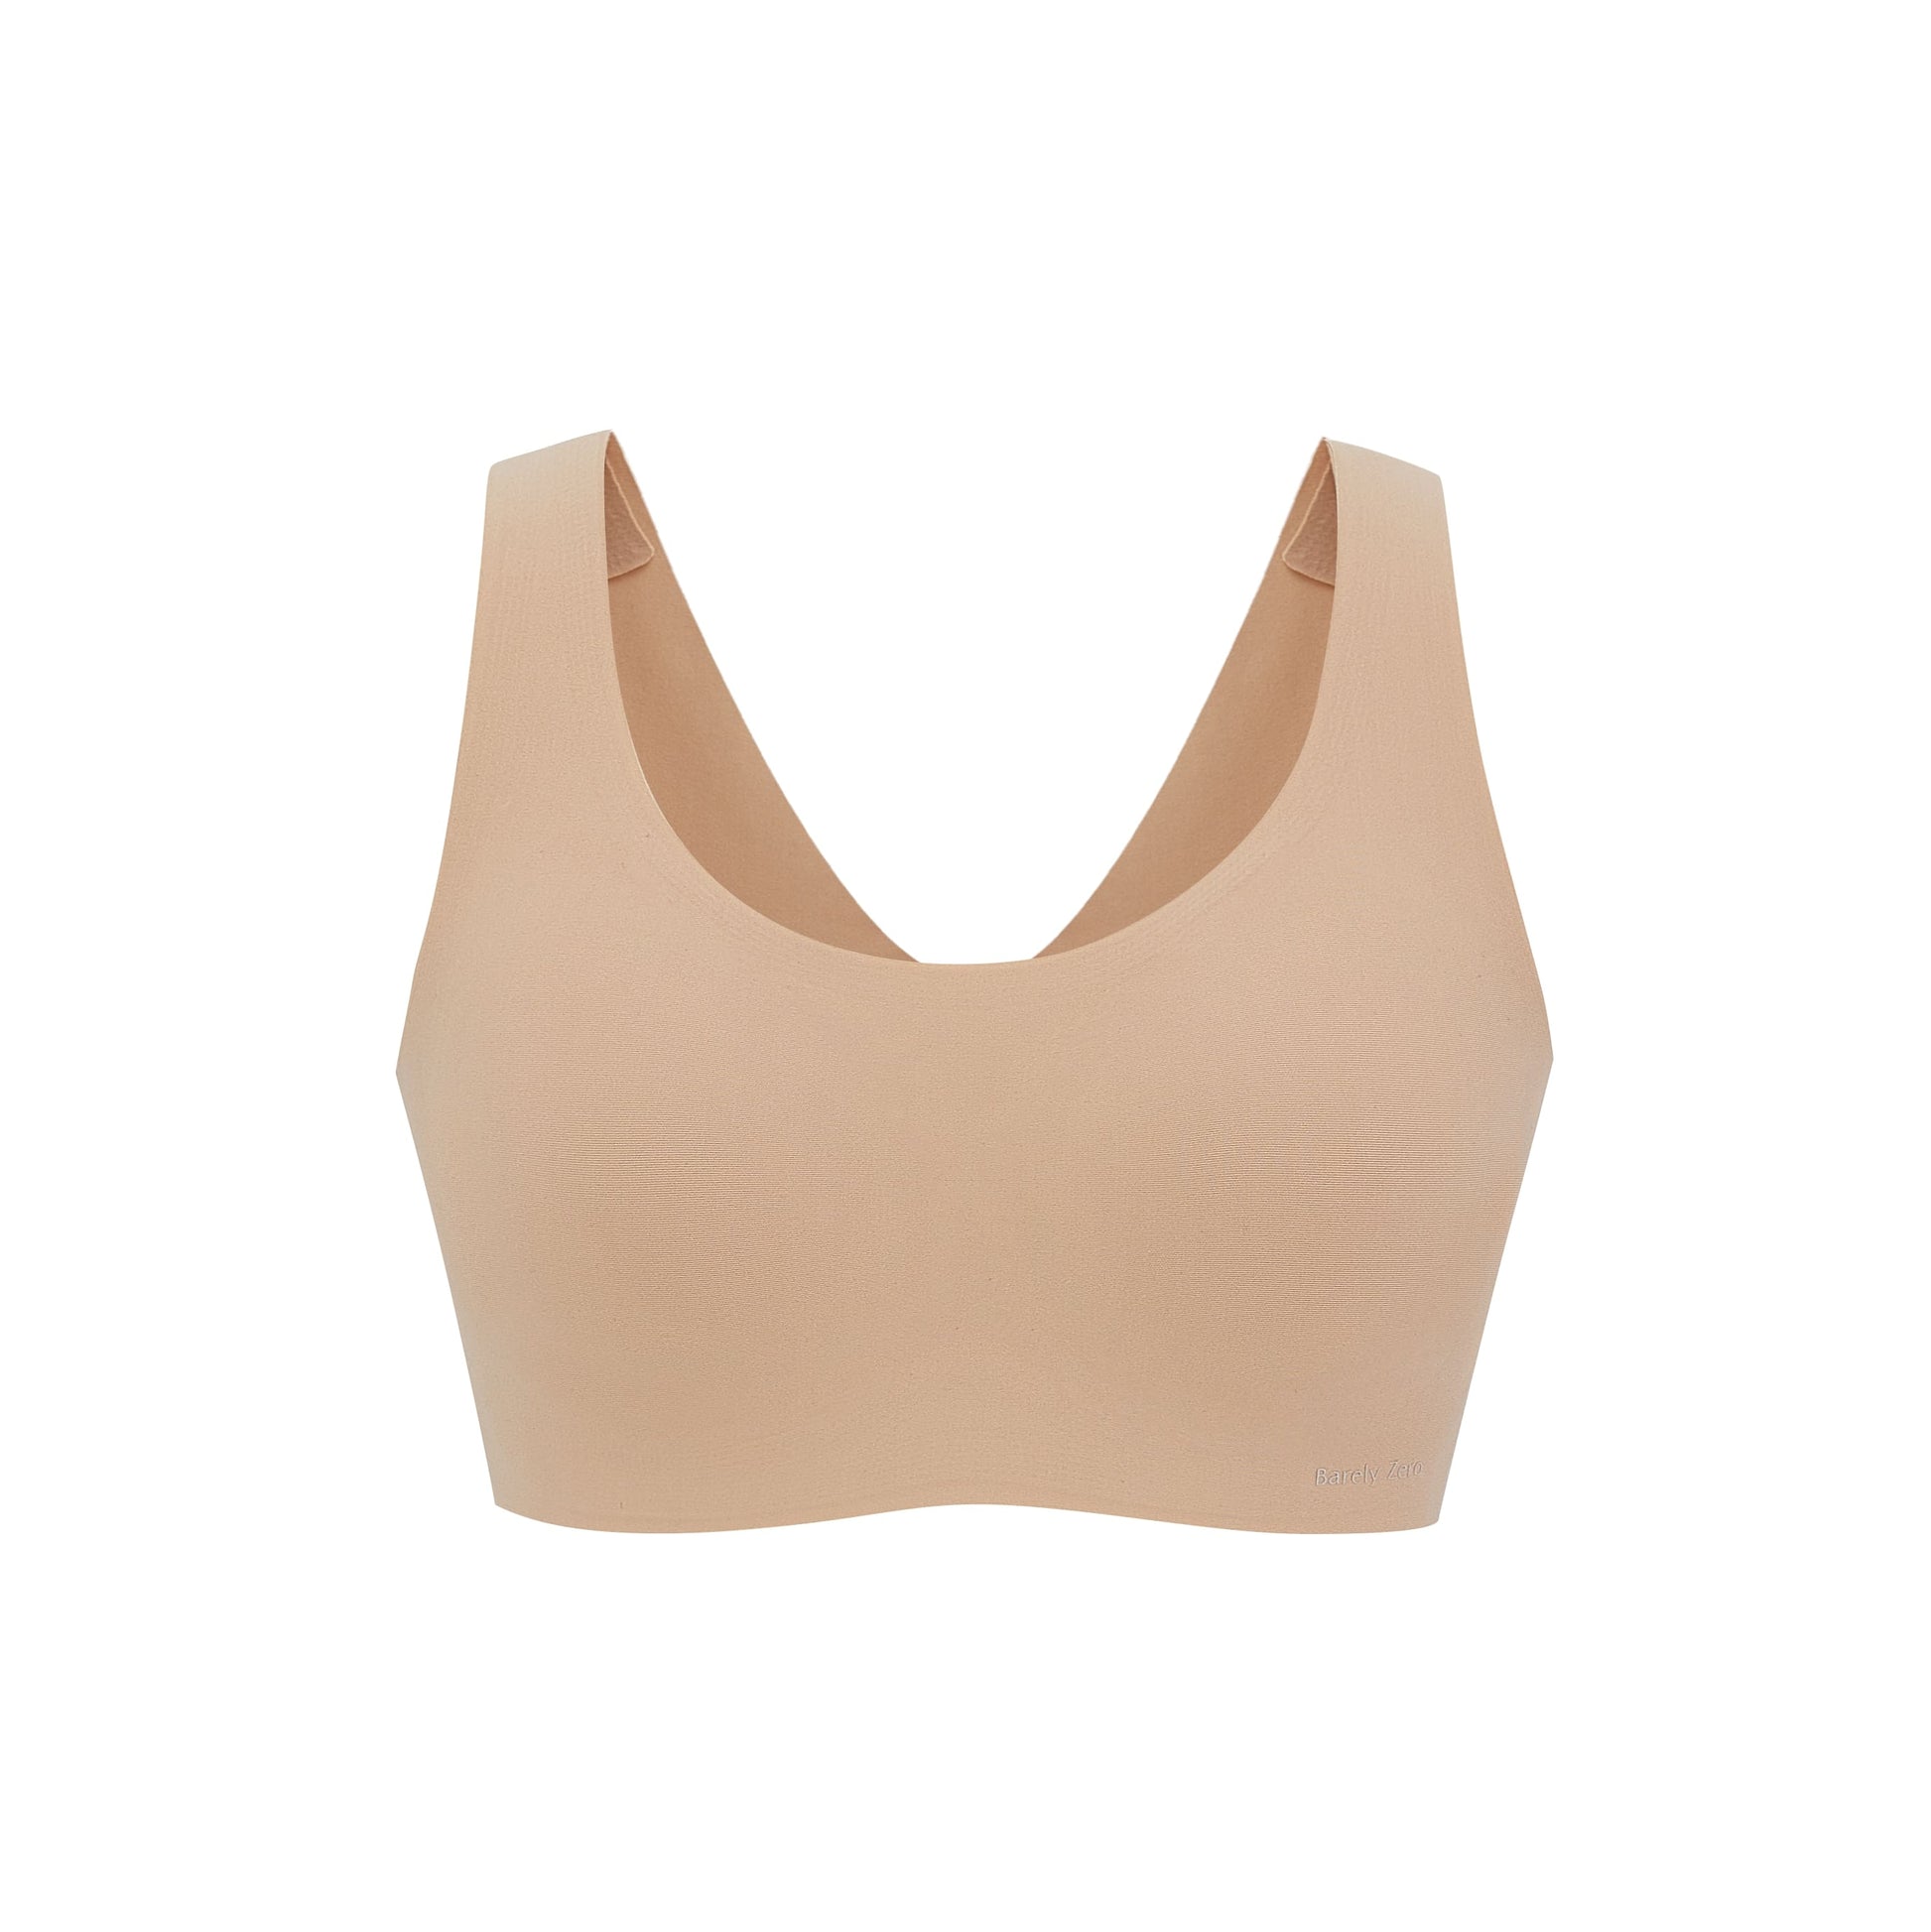 Ribbed Sports Bra - Classic Collection - Black – The aDoraBle